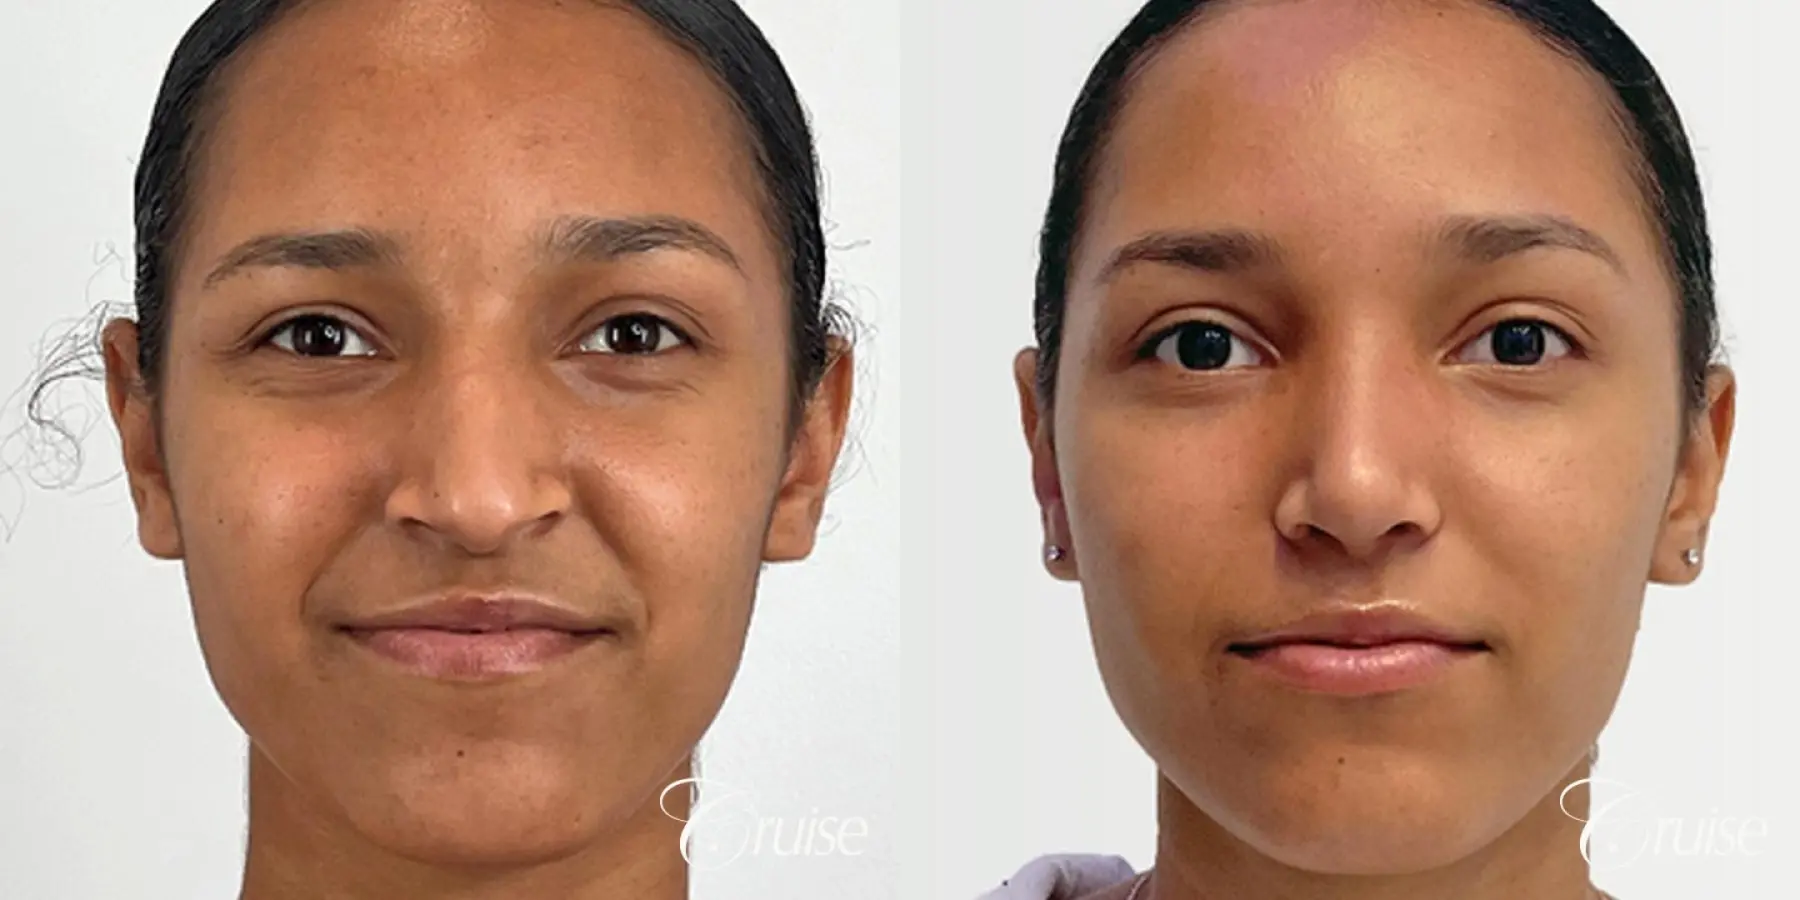 Open Ethnic Rhinoplasty - Before and After 2